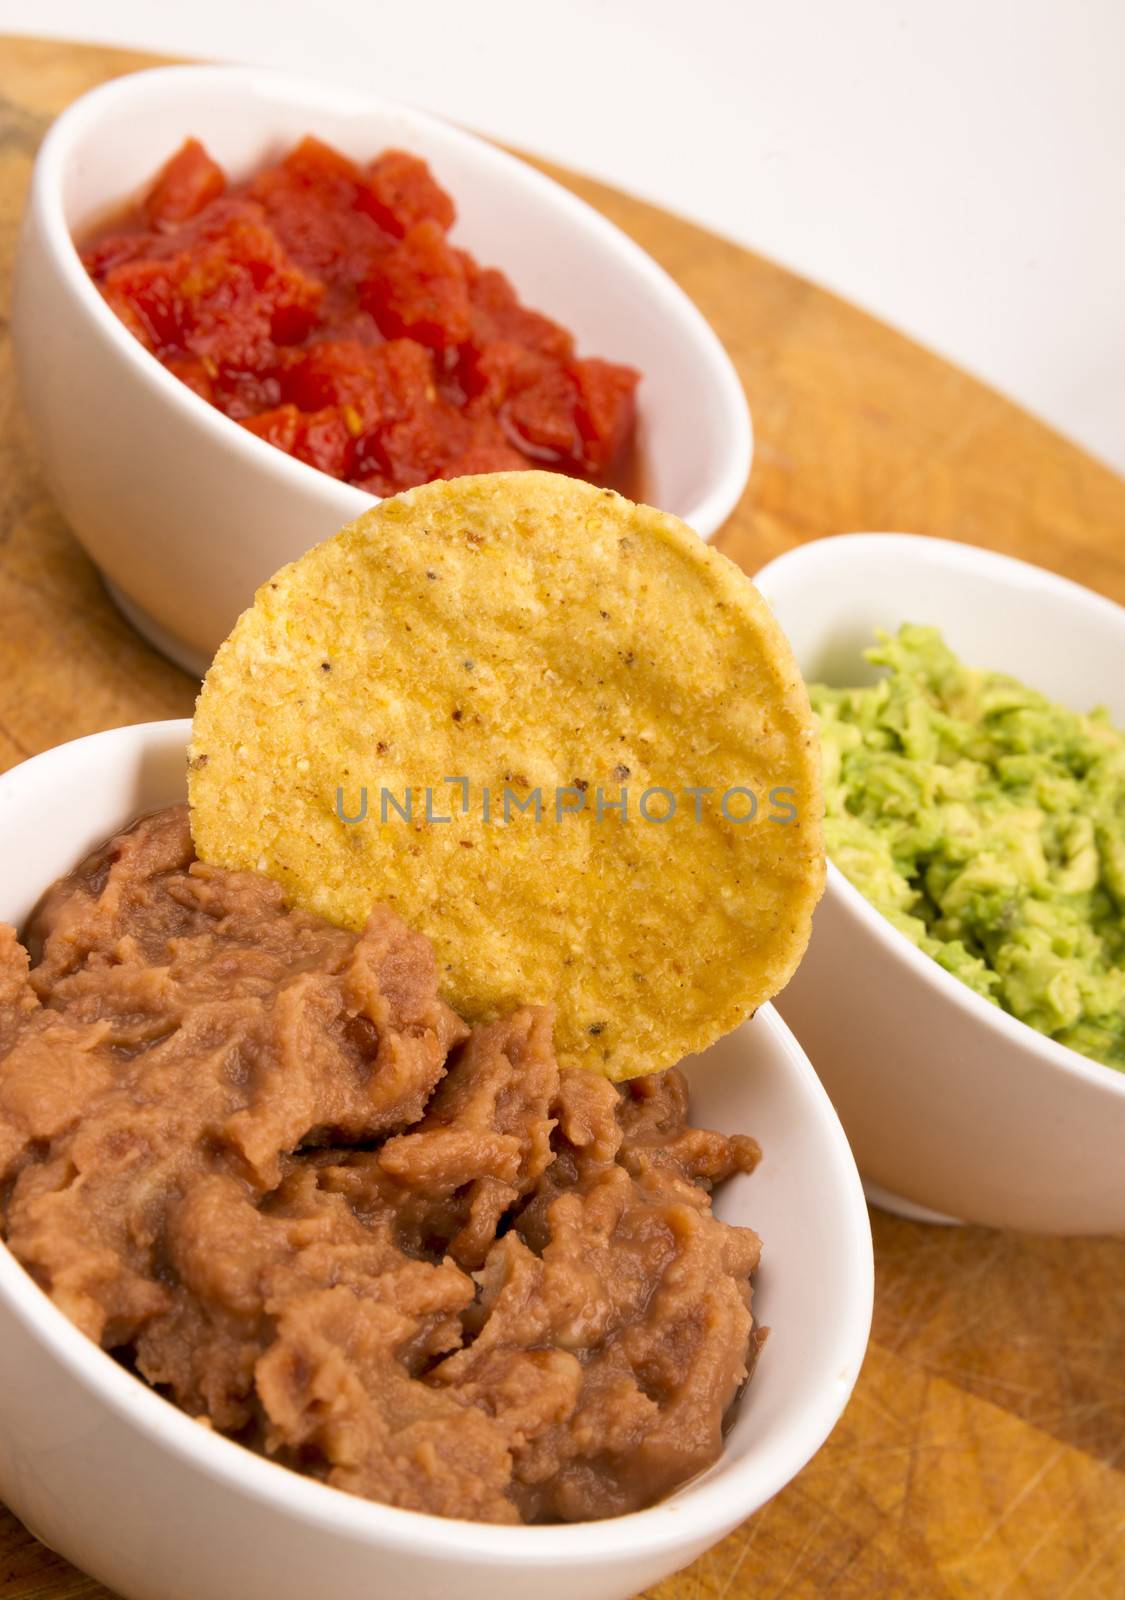 Food Appetizers Chips and Salsa Refried Beans Guacamole on Wood Cutting Board 